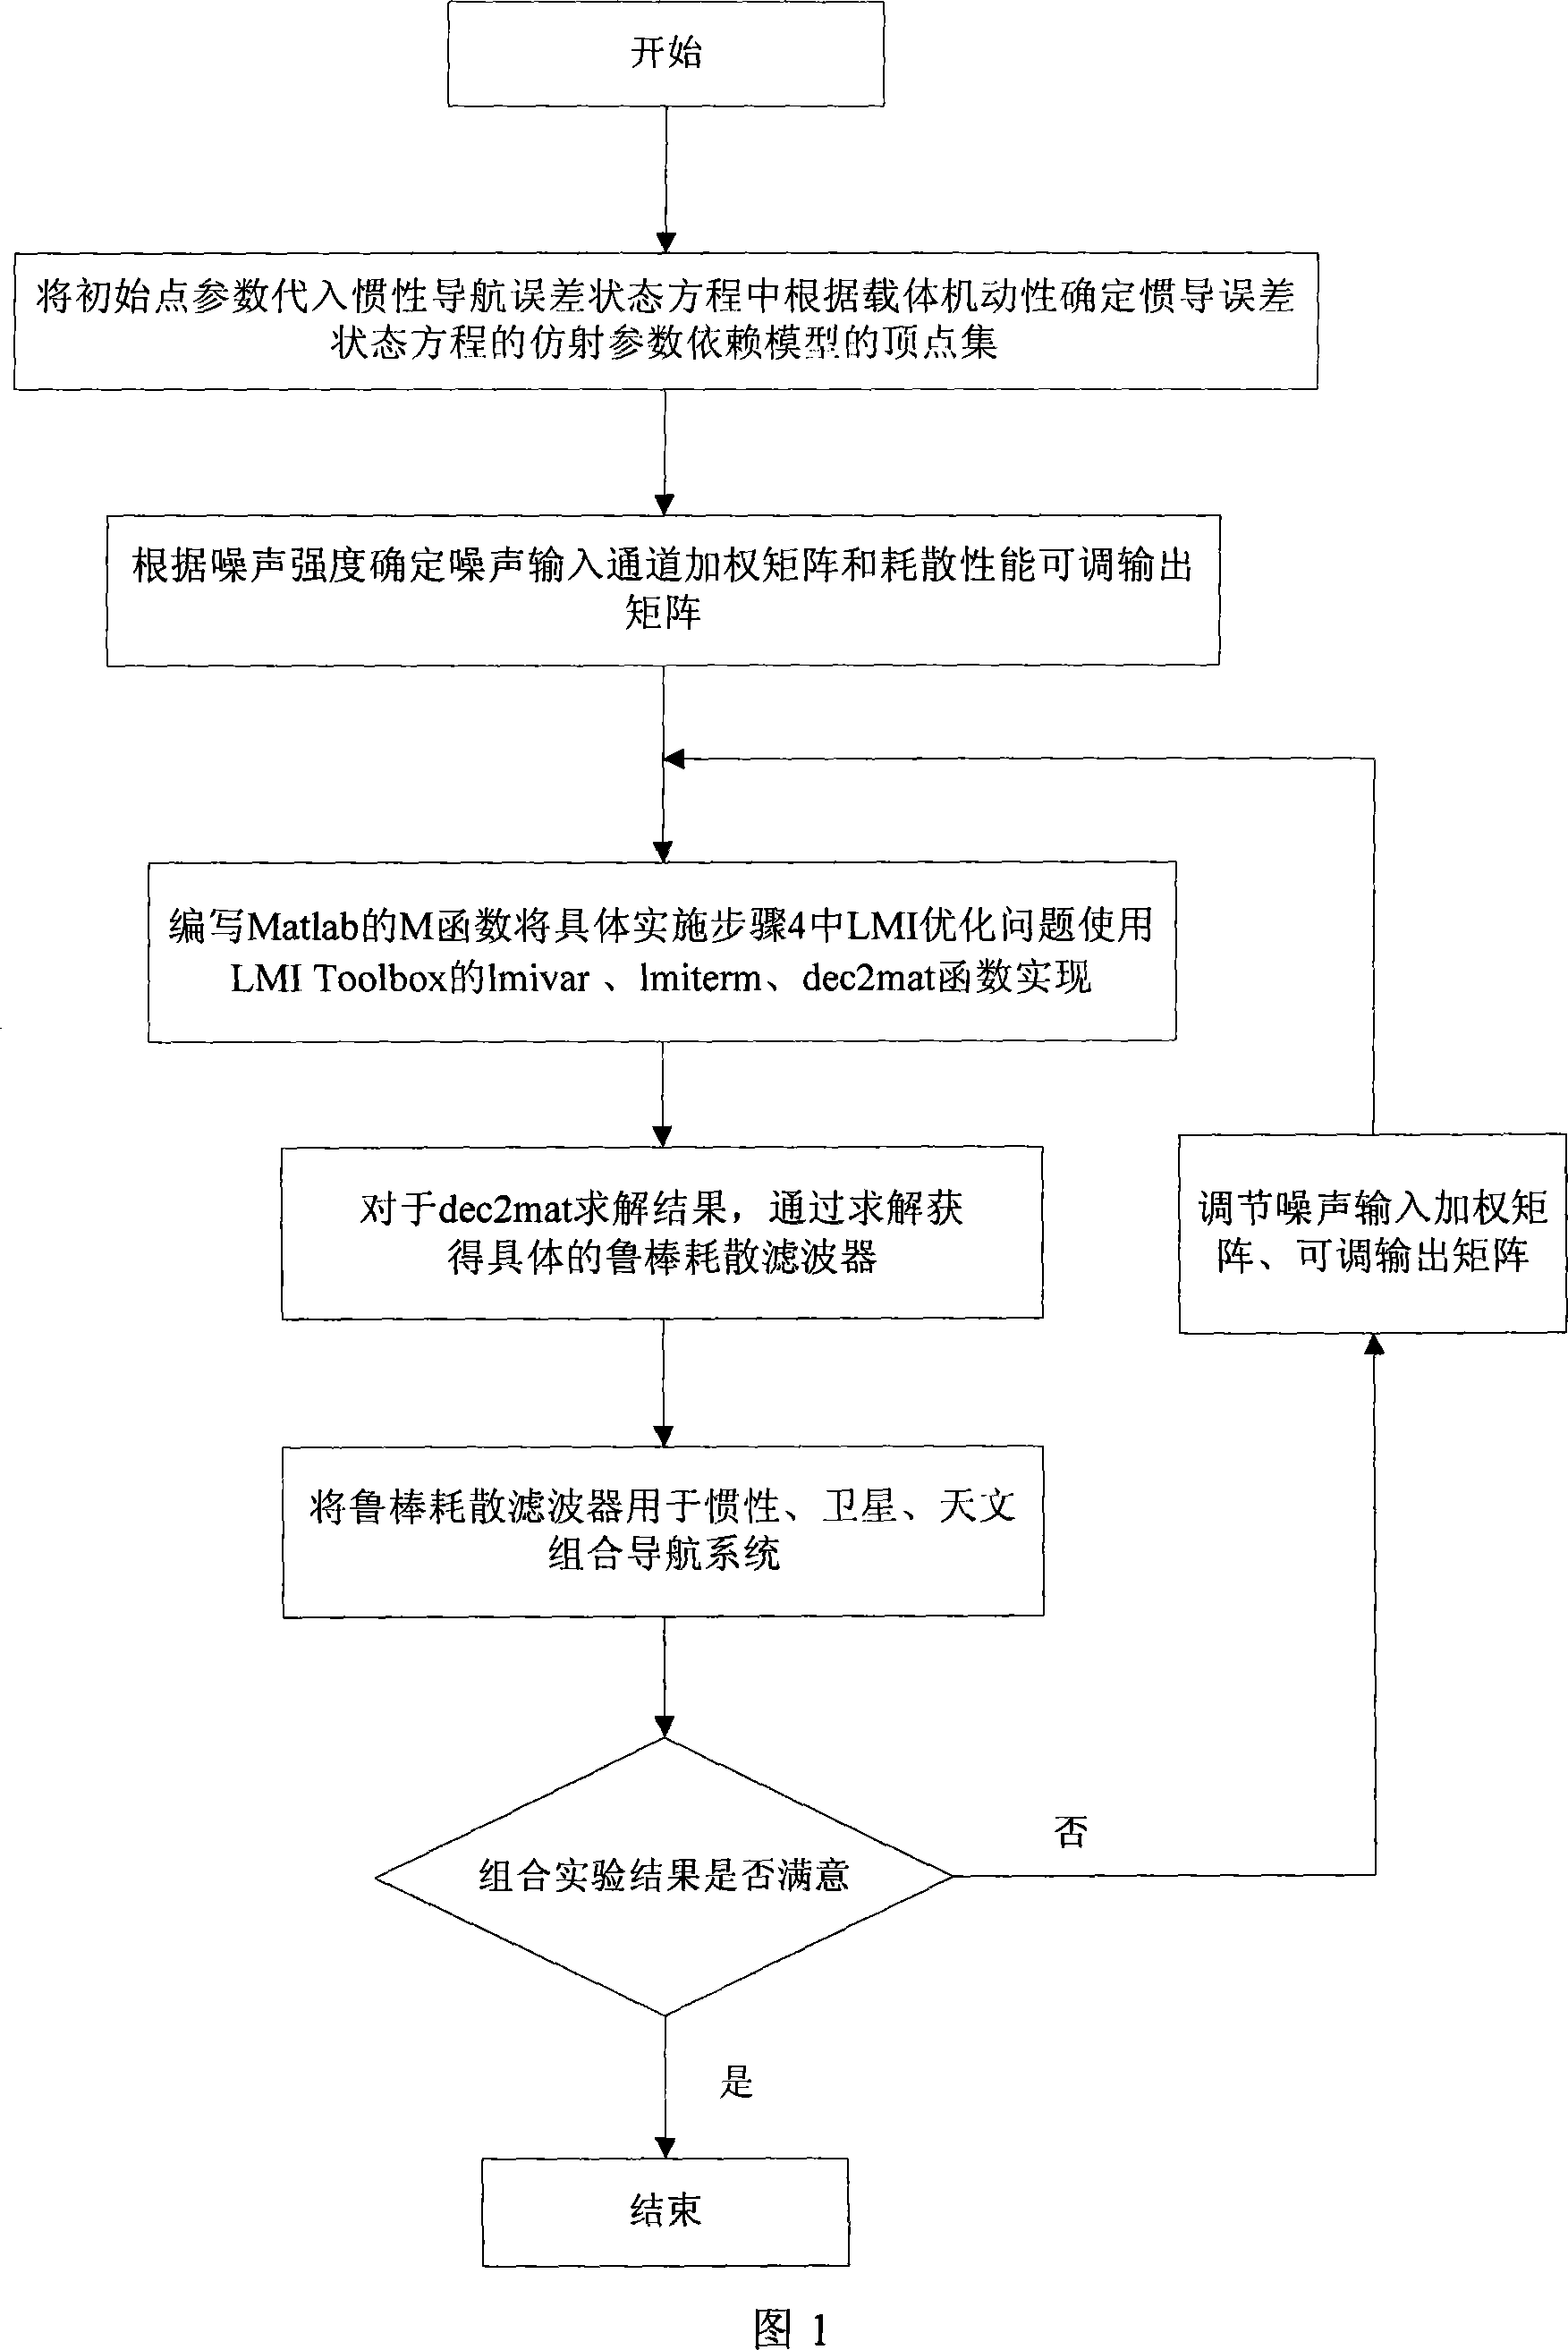 Combinated navigation method based on robust dissipation filtering